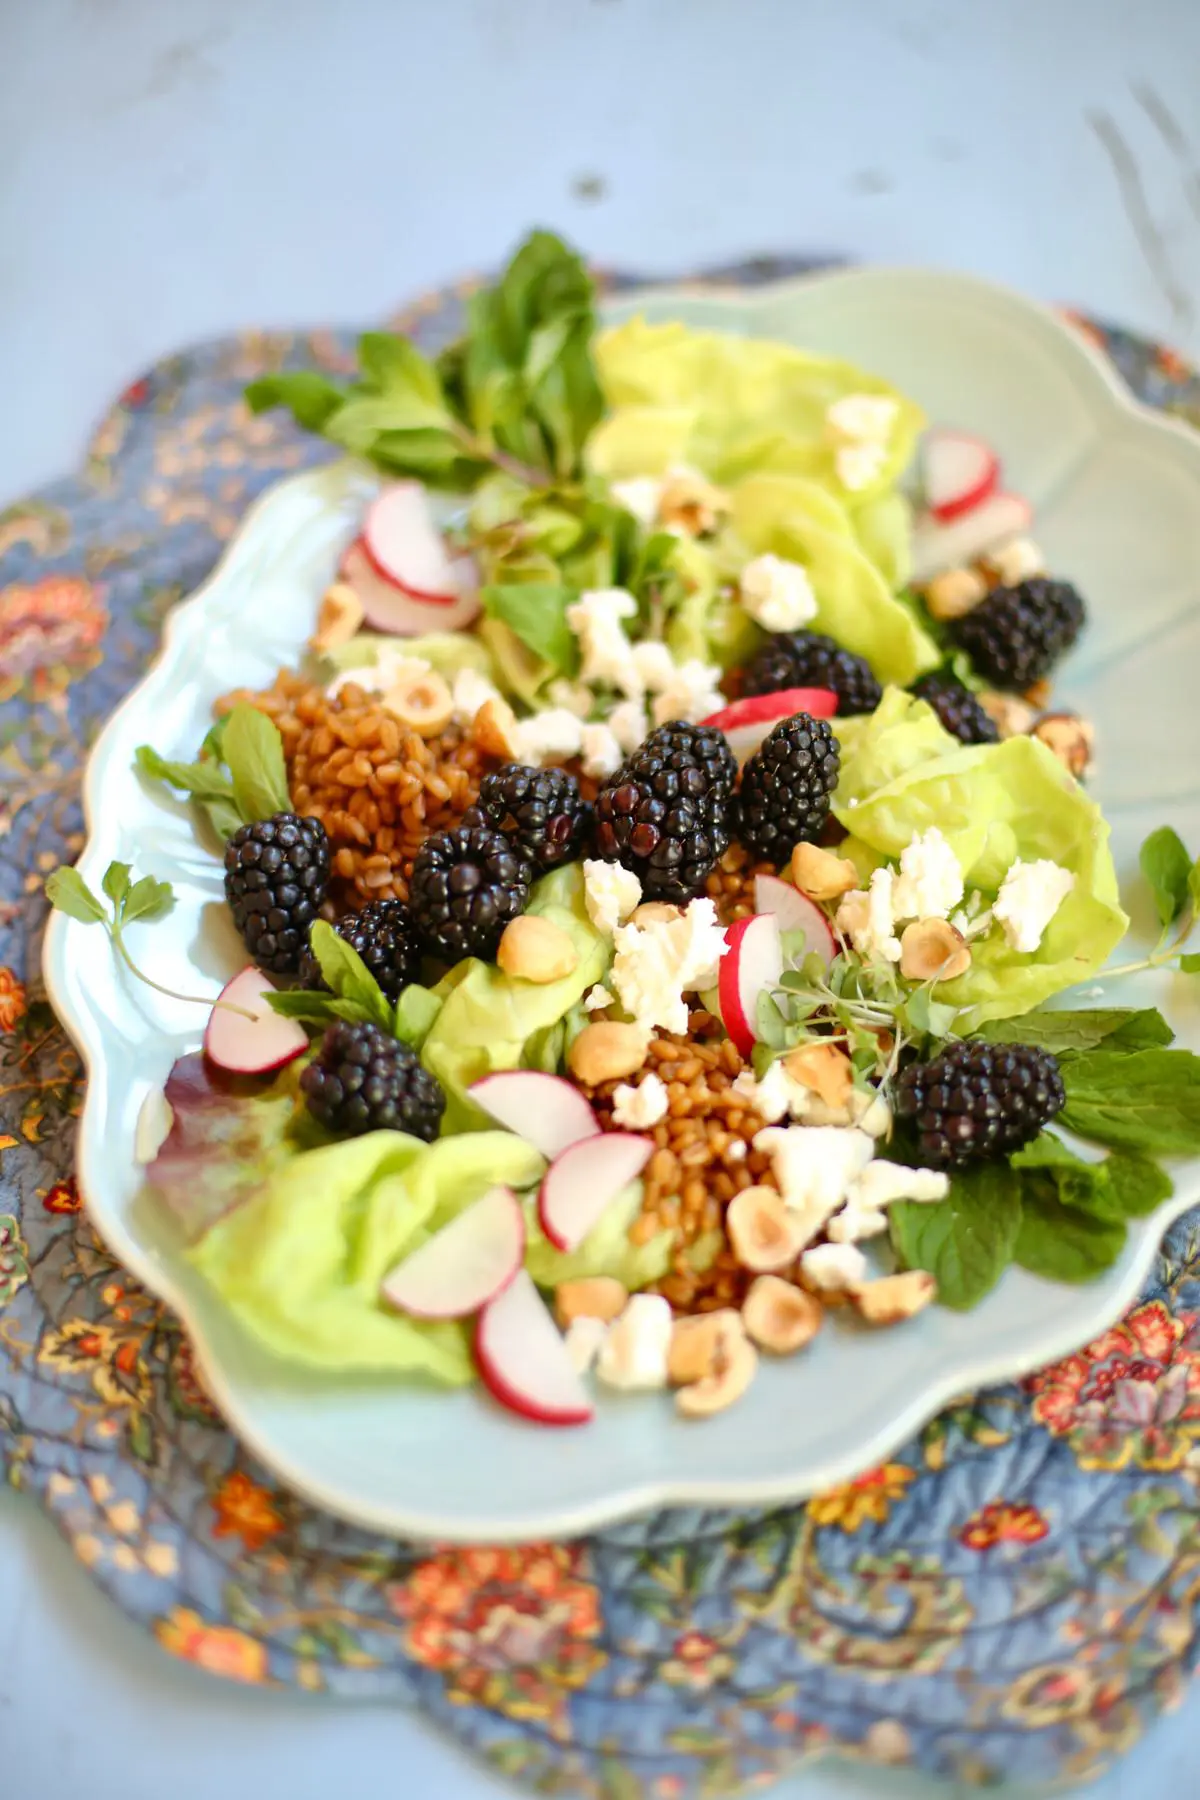 Blackberry, Goat Cheese, greens, radish and hazelnuts on a ling blue platter